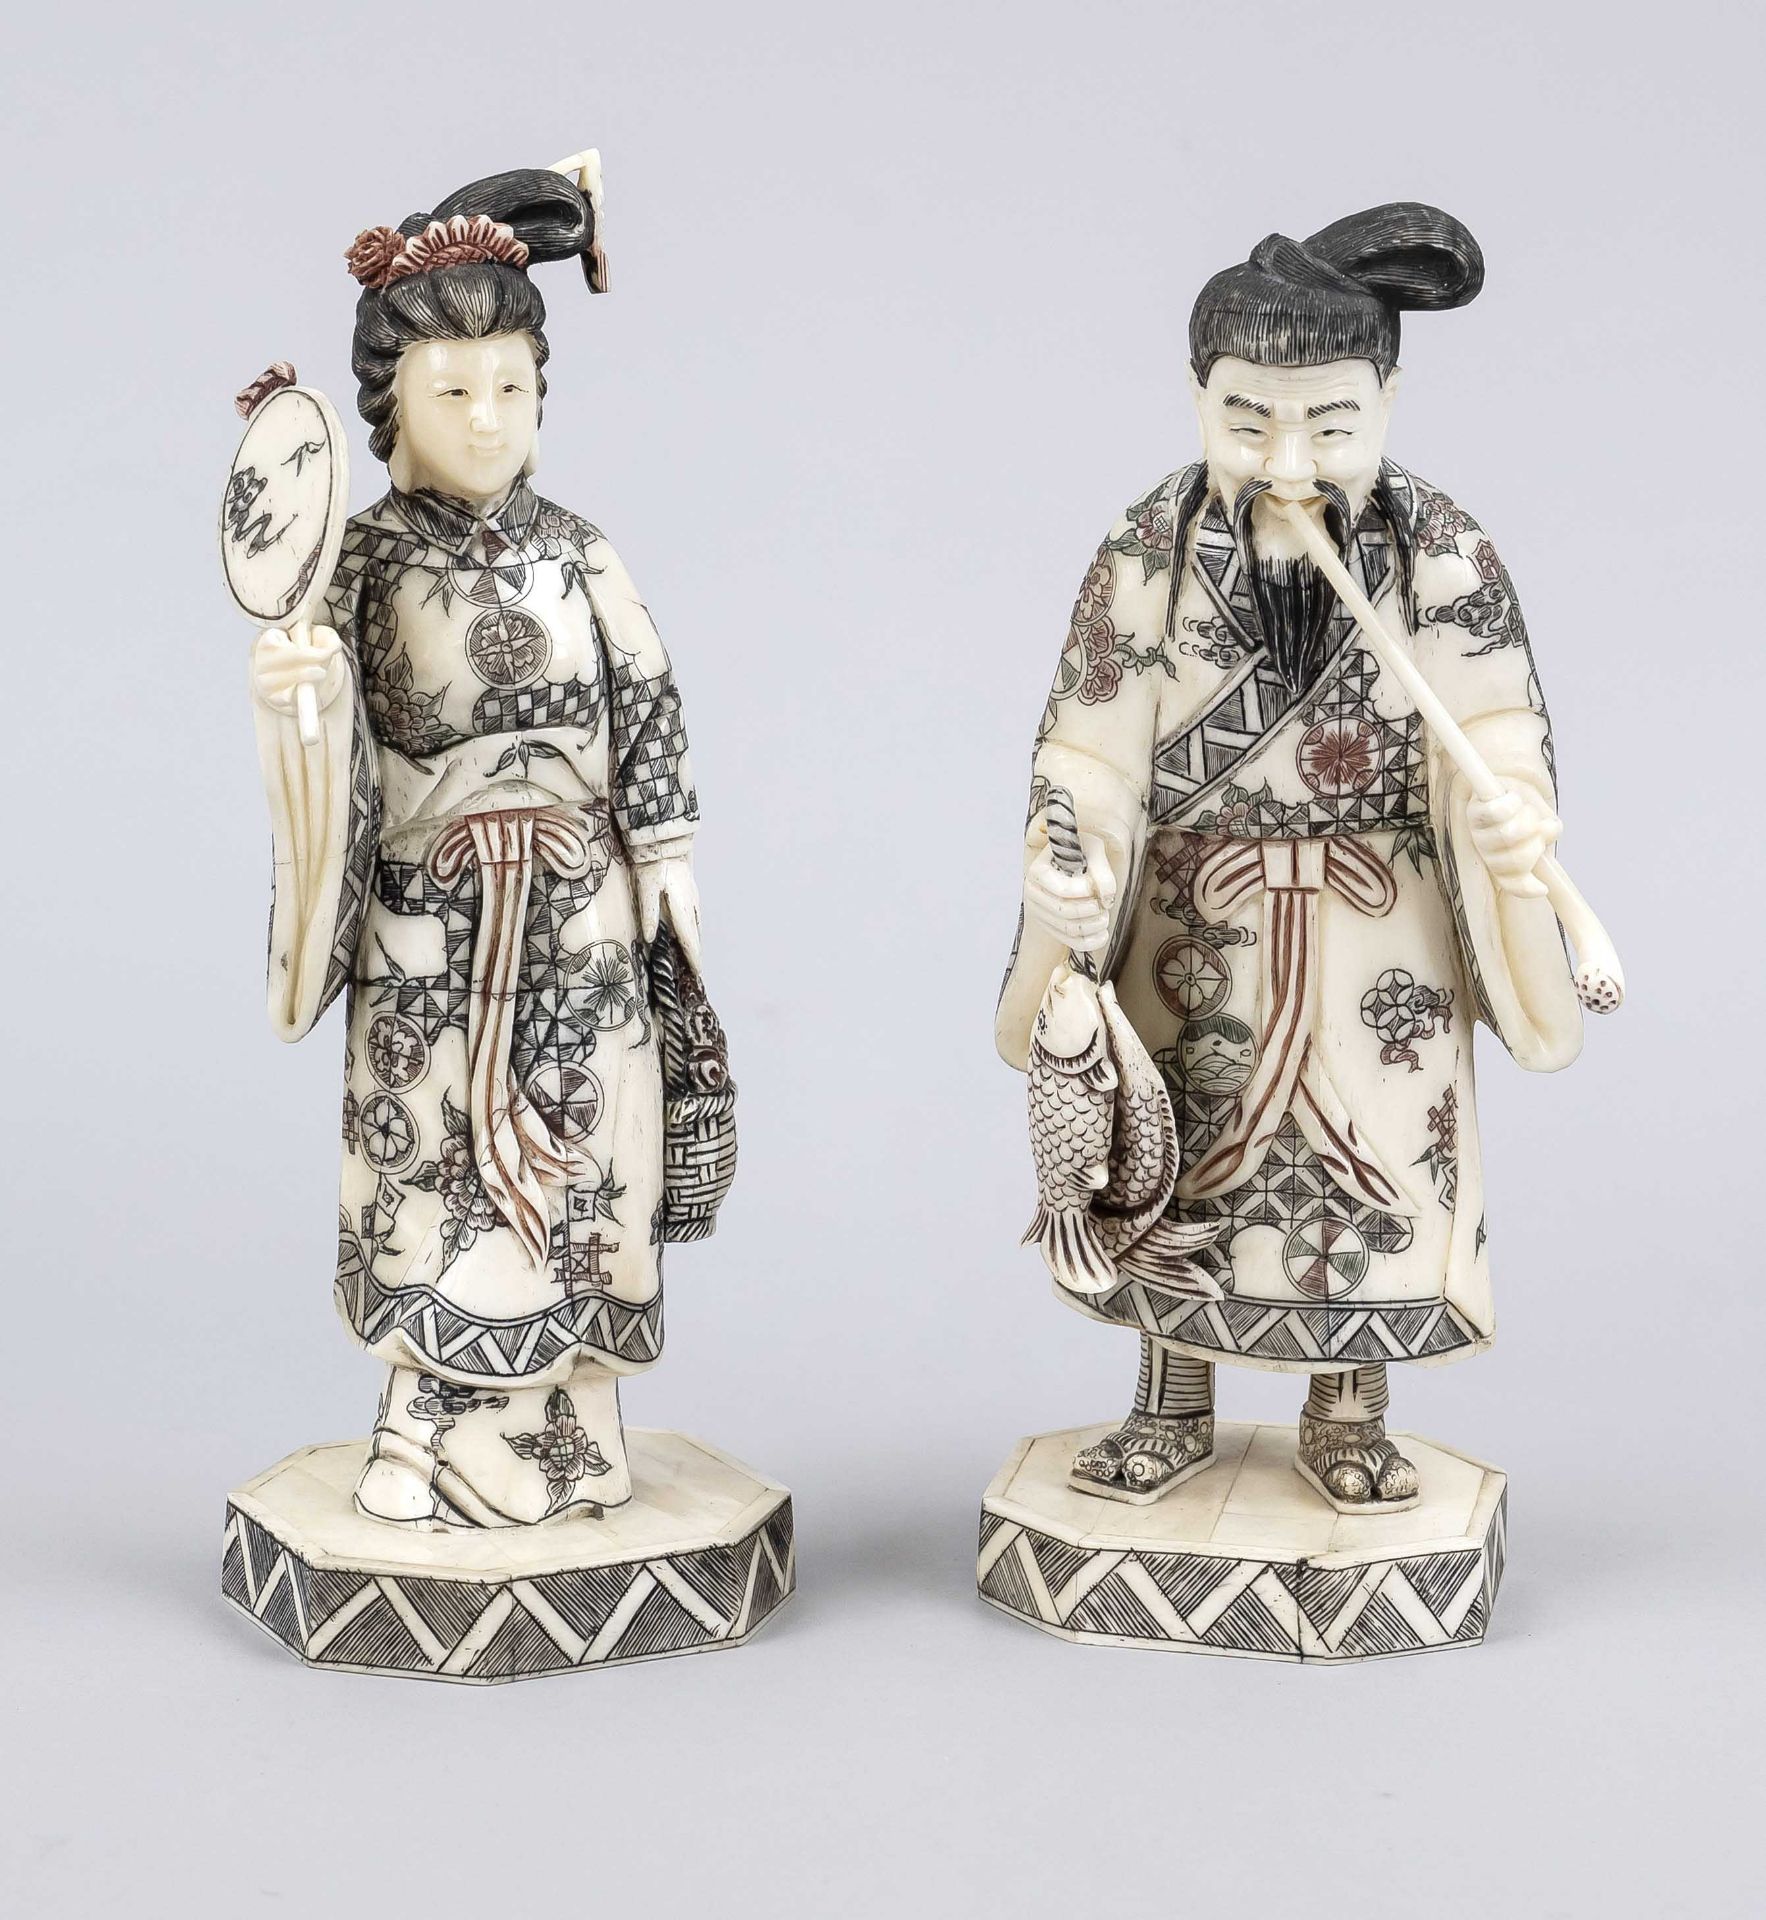 Pair of leg figures, Japan c. 1900 (Meiji). 1 x fisherman with pipe, 1 x lady with fan and flower